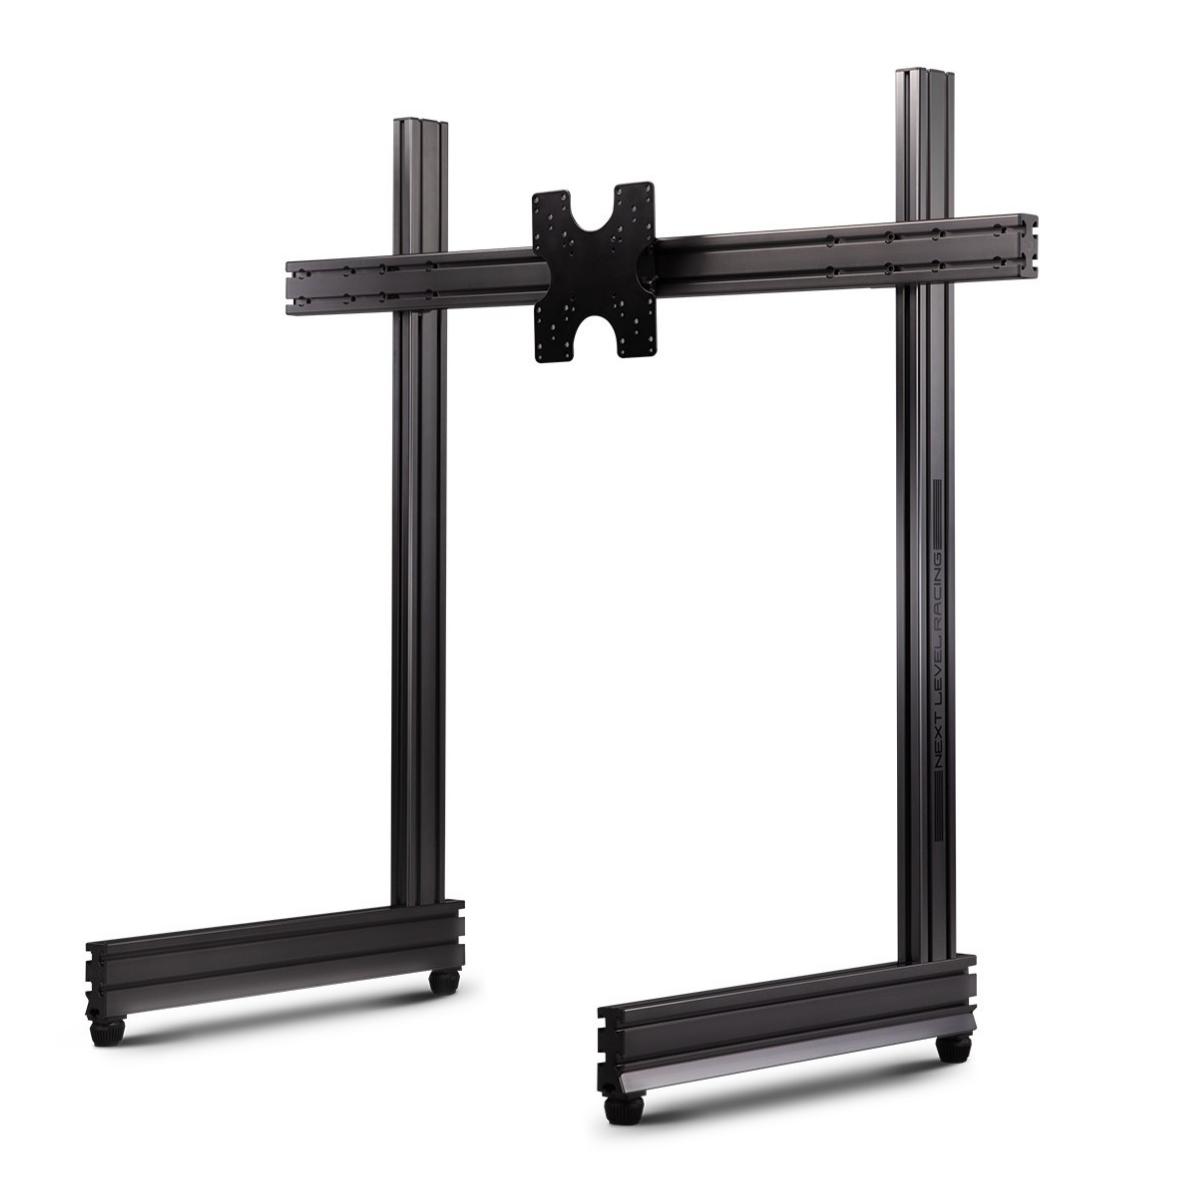 STAND RACING ELITE FREE NLR-E005 LEVEL MONITOR SINGLE STANDING NEXT